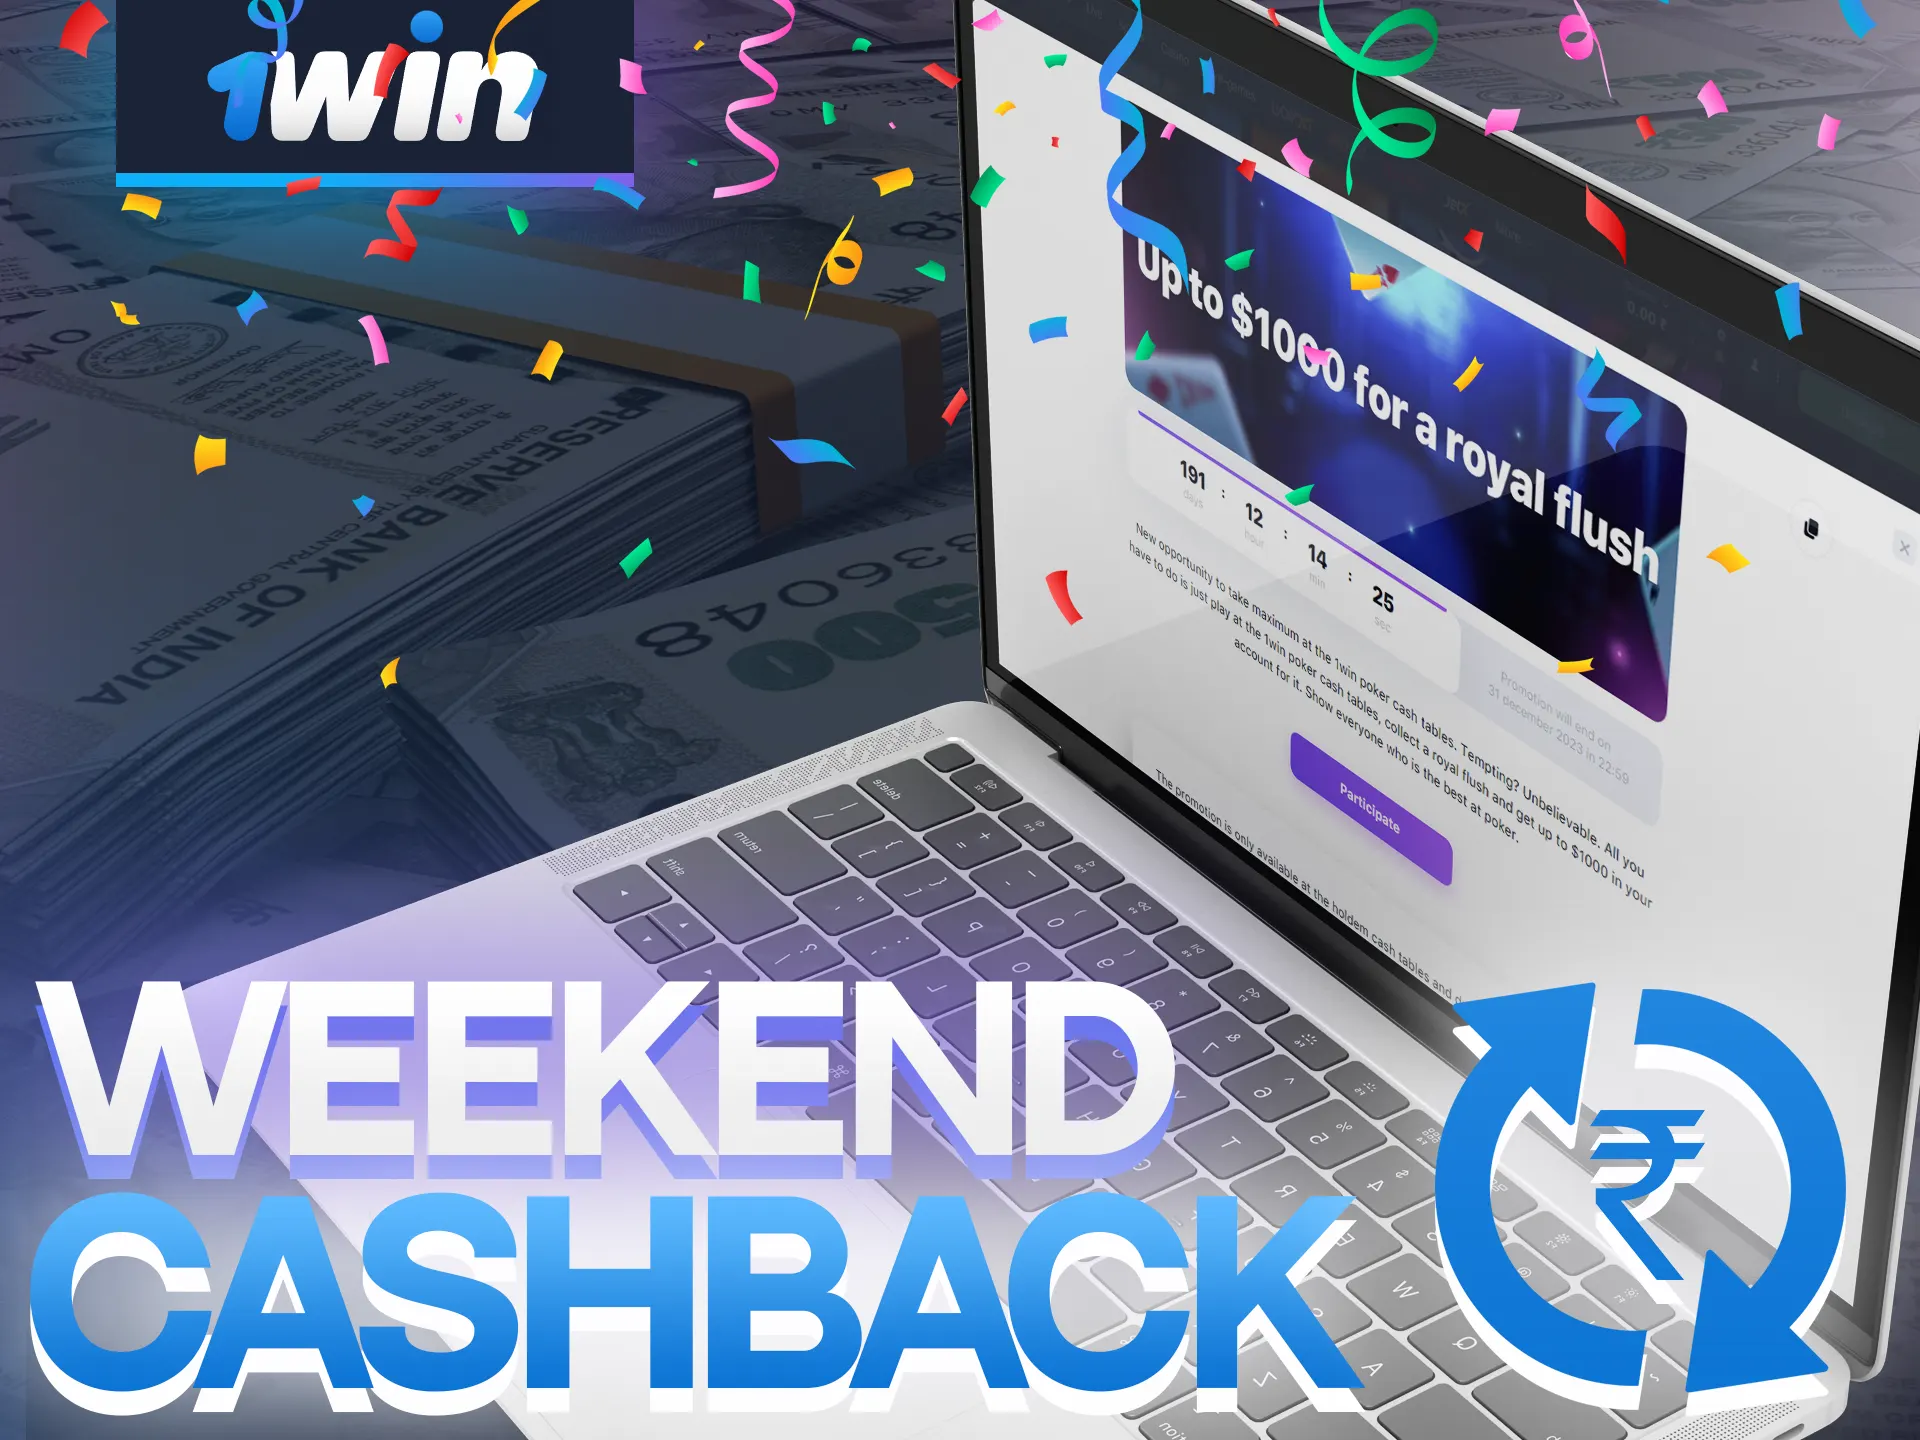 Get profitable weekend cashback at 1Win.